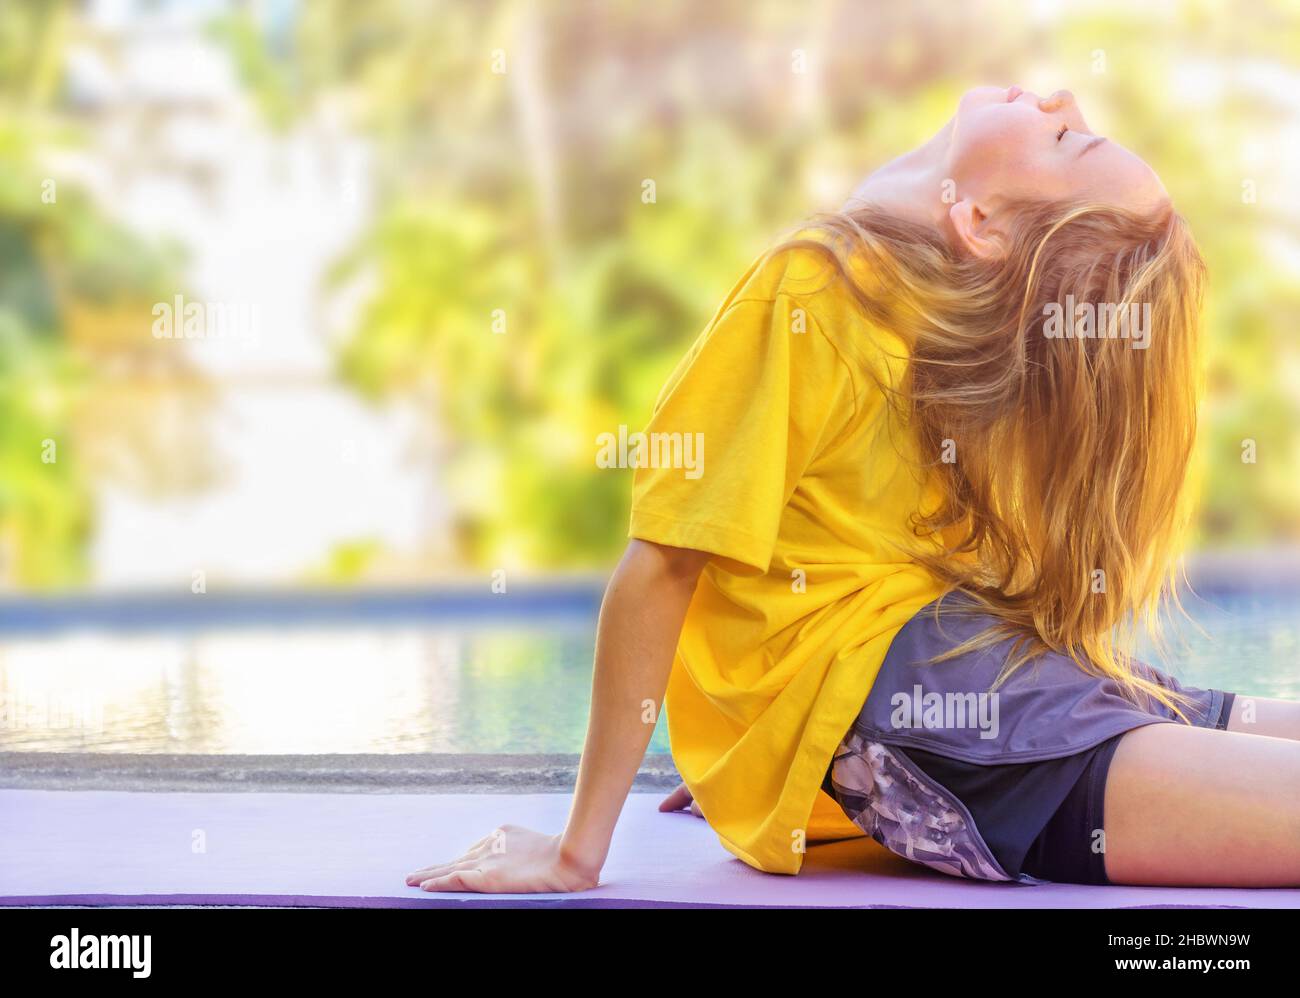 Teenage girl doing exercises during morning workout outdoors Stock Photo